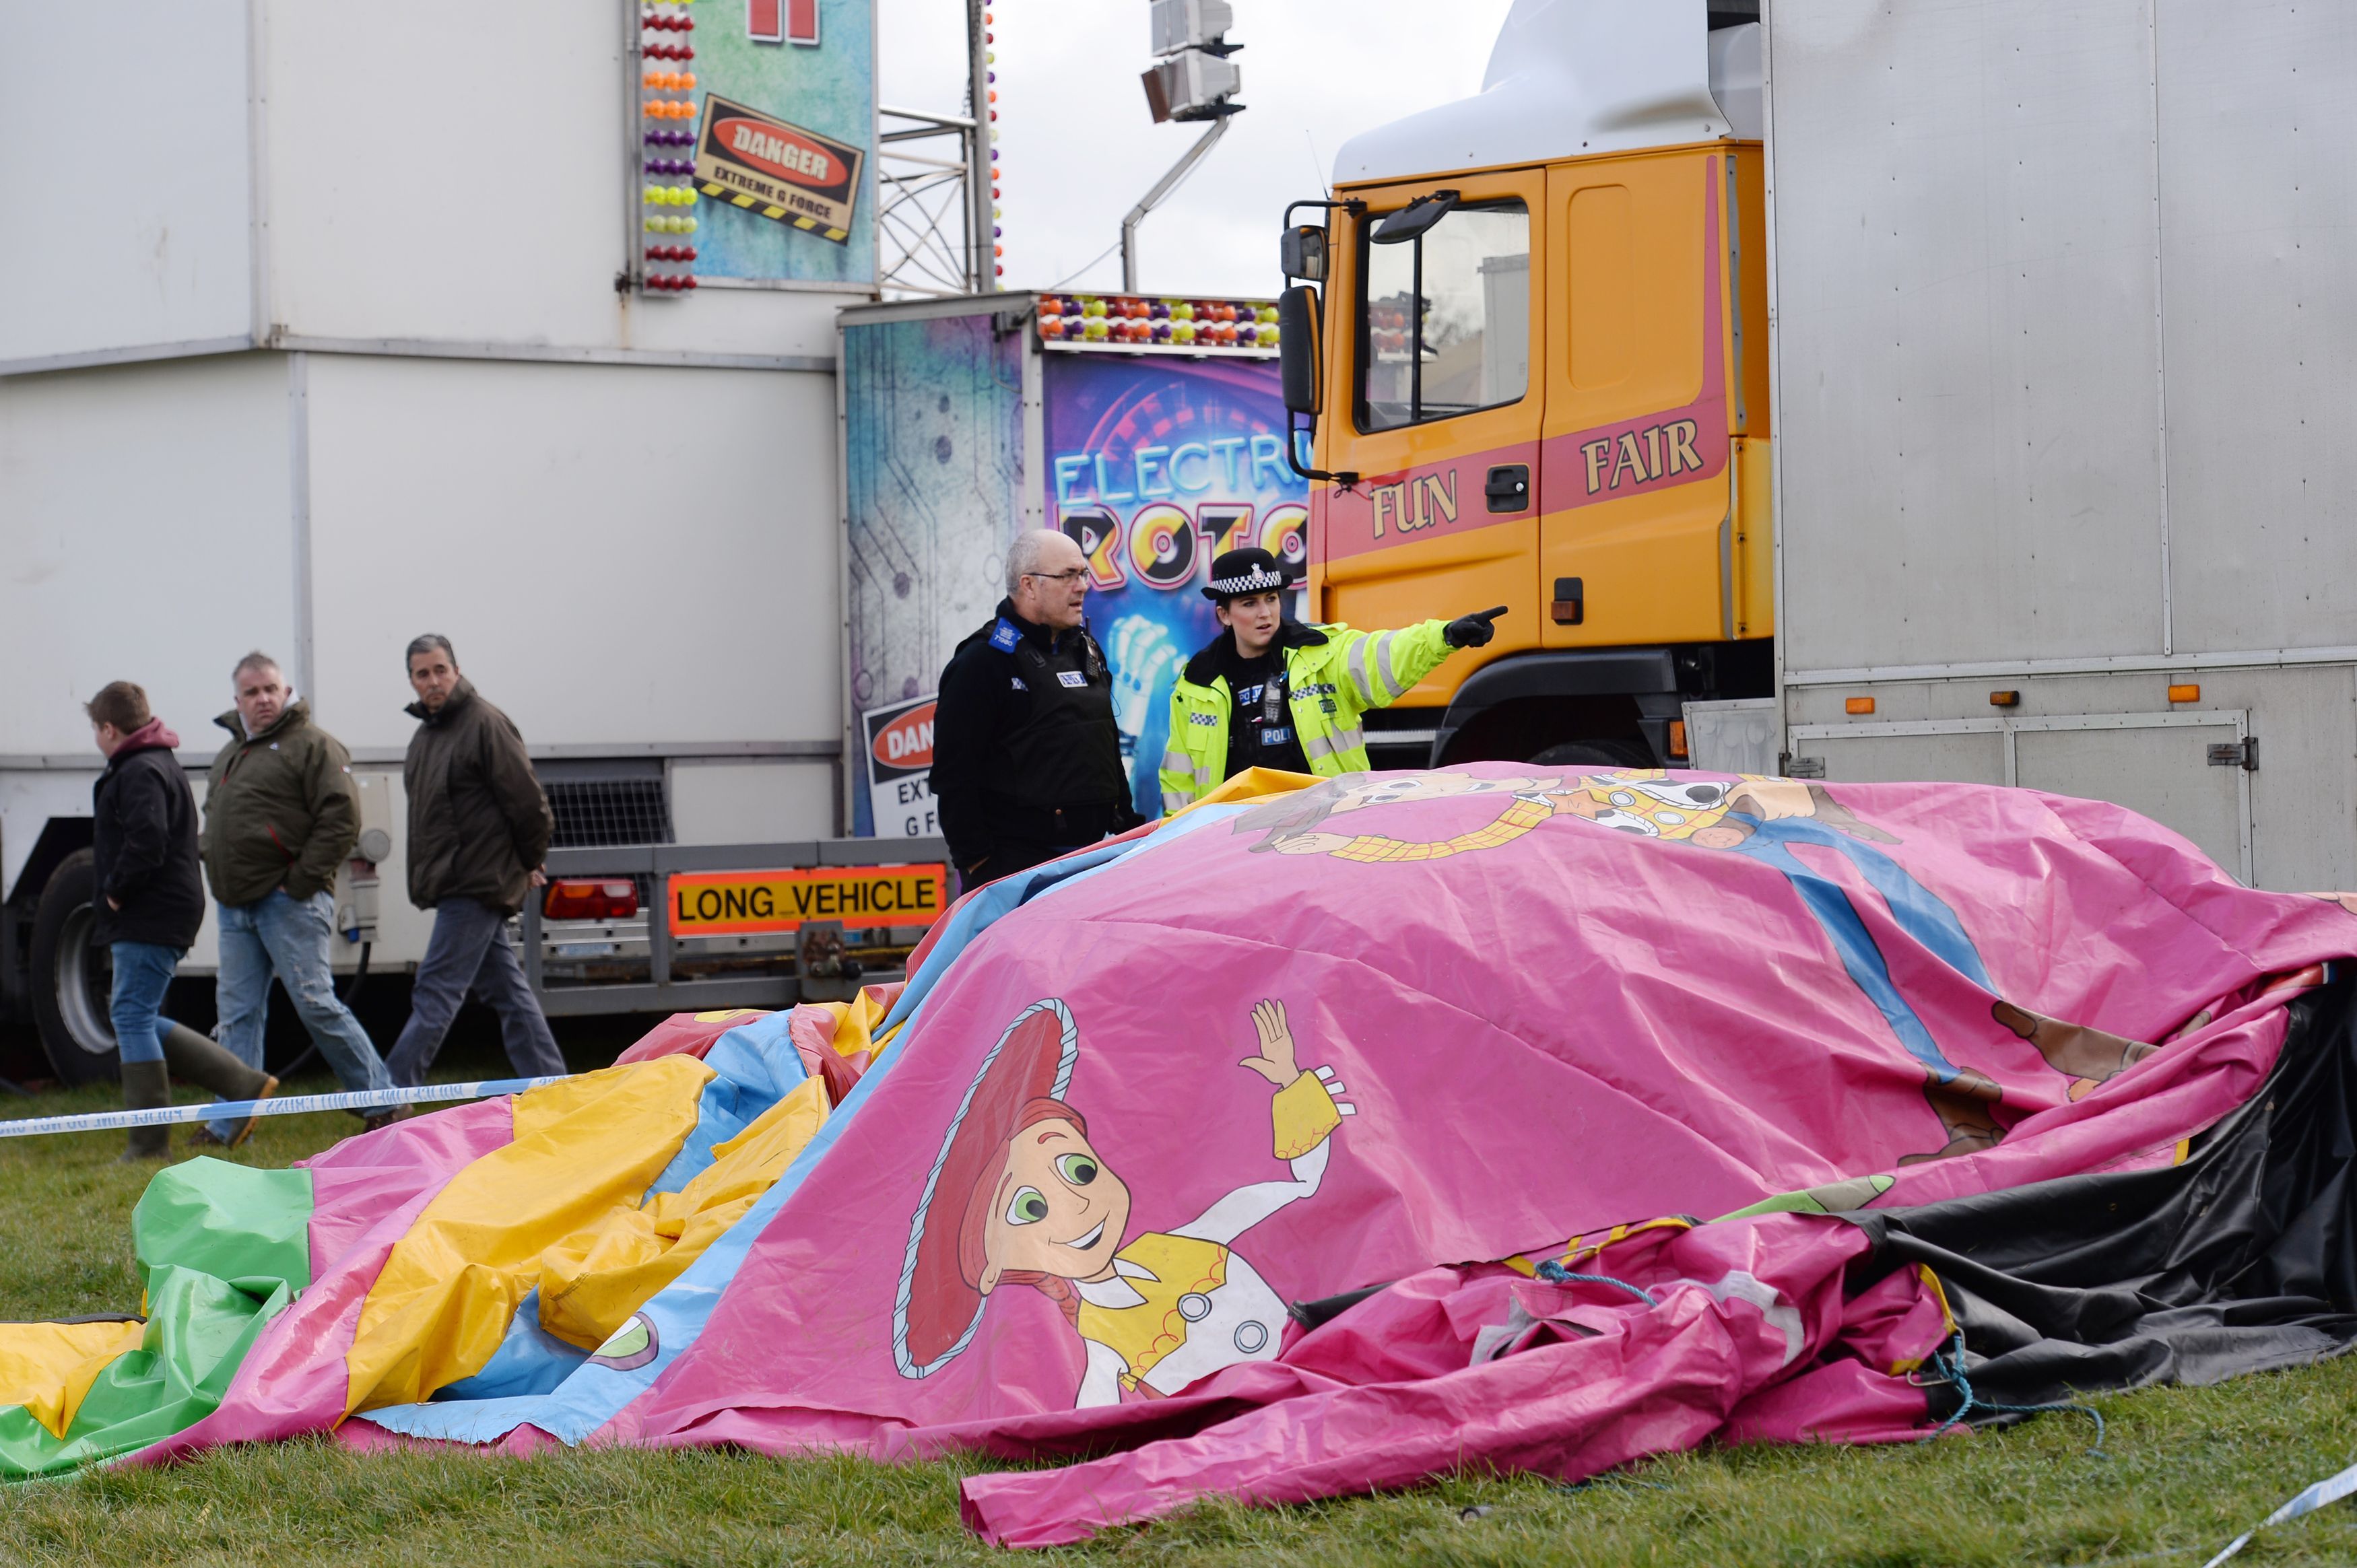 Police and forensic officers attend the scene where a seven-year old girl died after she was blown by the wind about 150 metres on a bouncy castle on March 27, 2016. (Stefan Rousseau—AP)